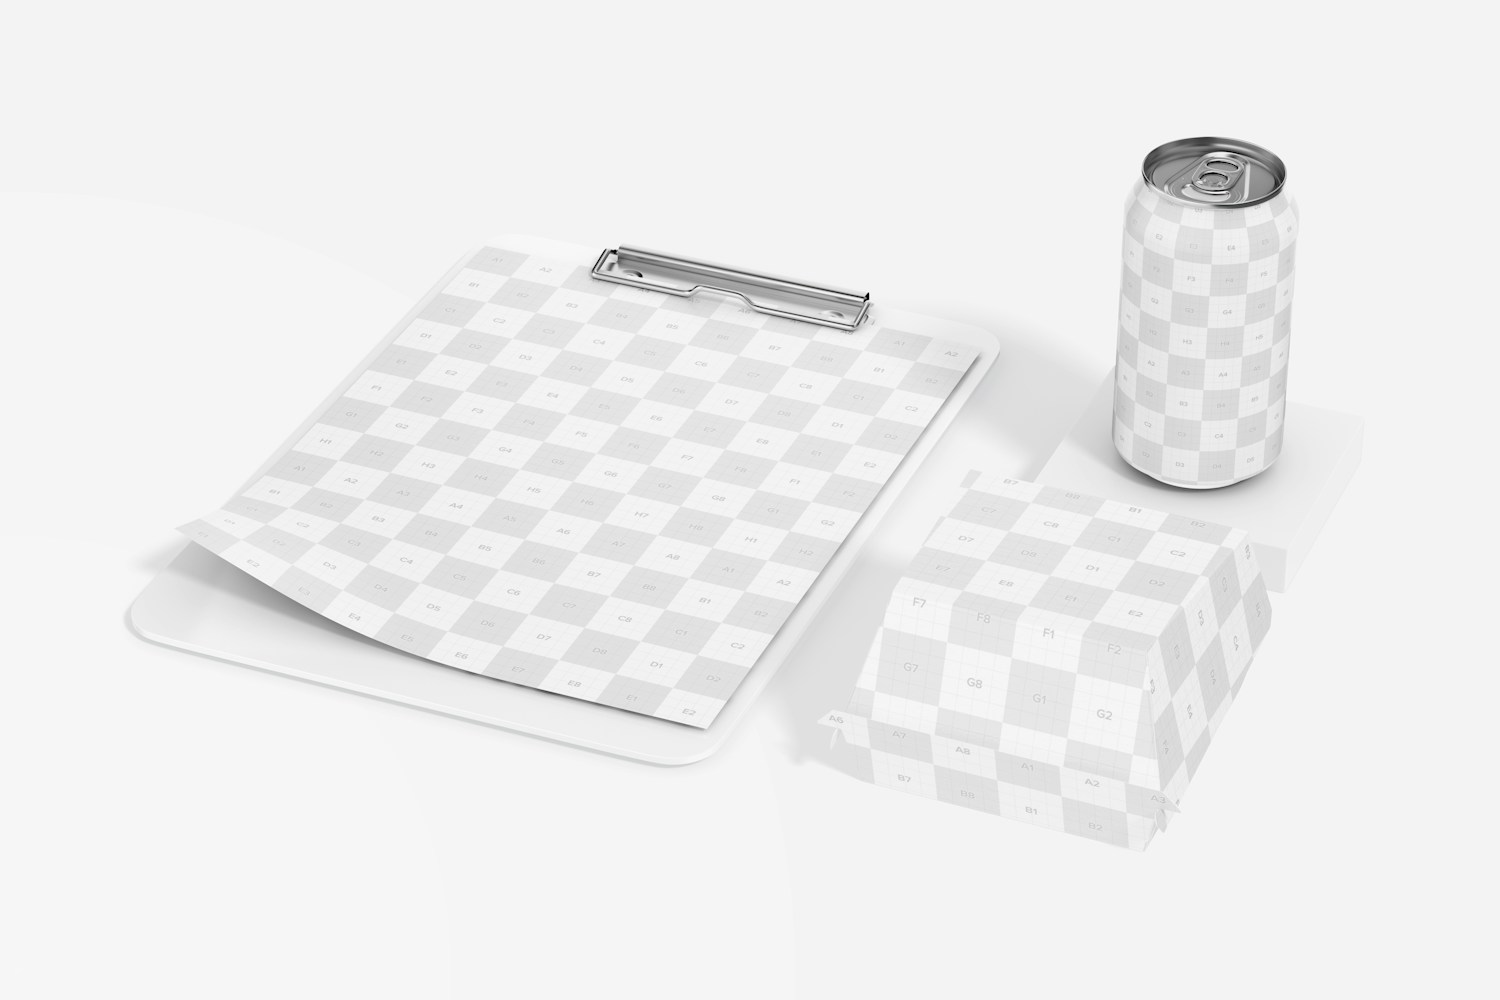 Stationery with Burger Box Mockup, Right View